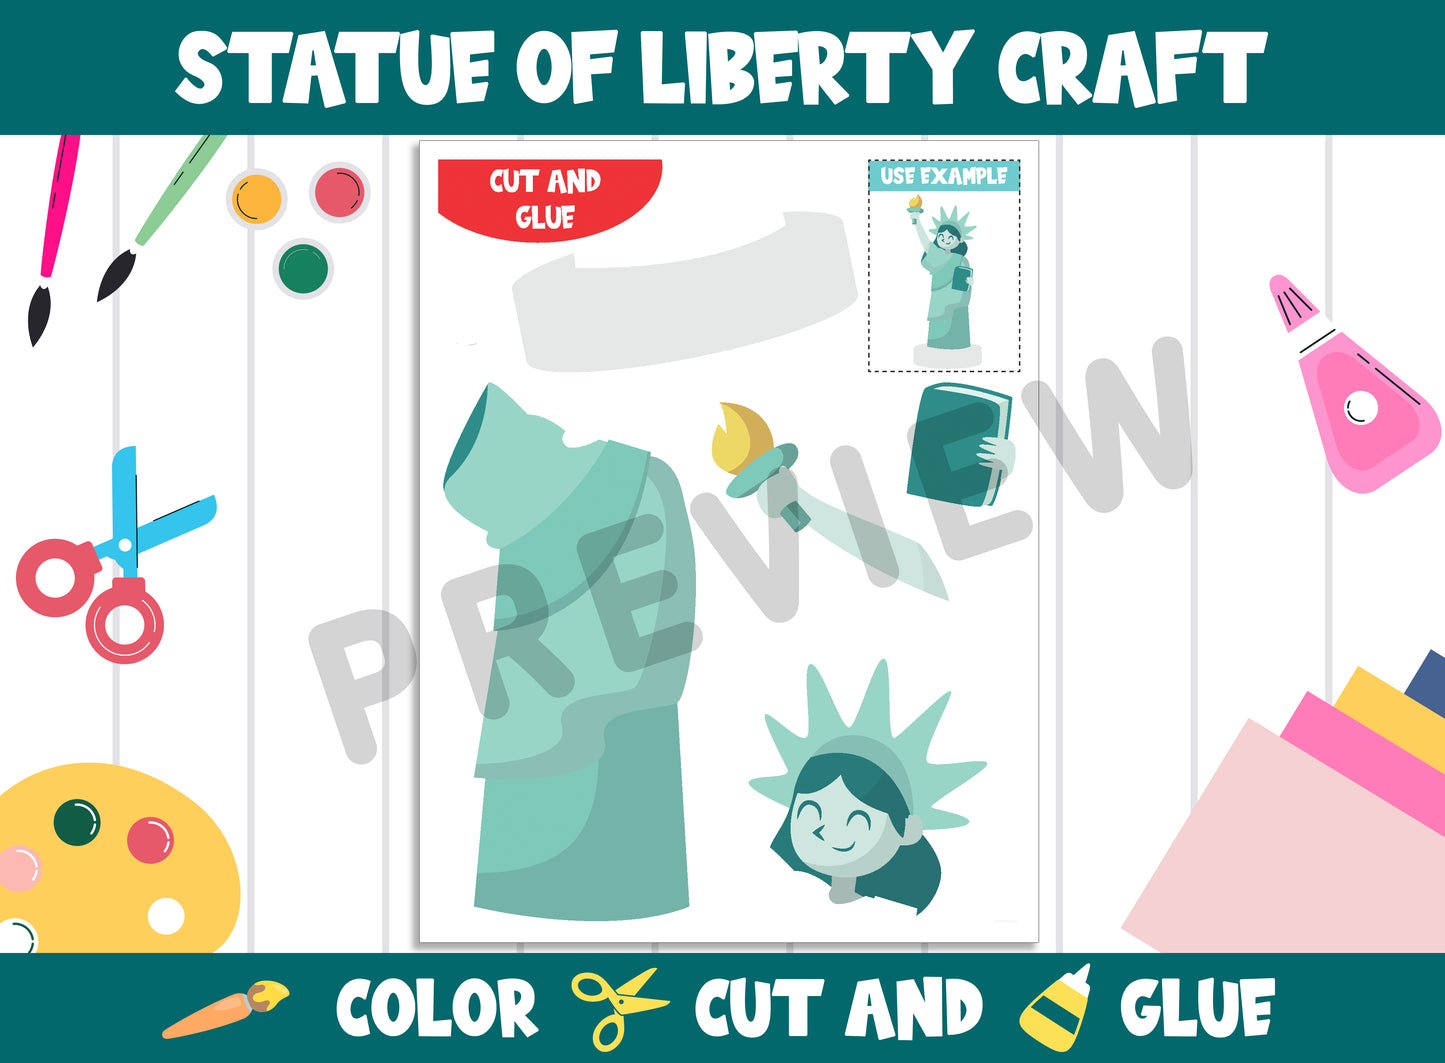 Statue of Liberty, Fourth of July Craft Activity - Color, Cut, and Glue for PreK to 2nd Grade, PDF File, Instant Download